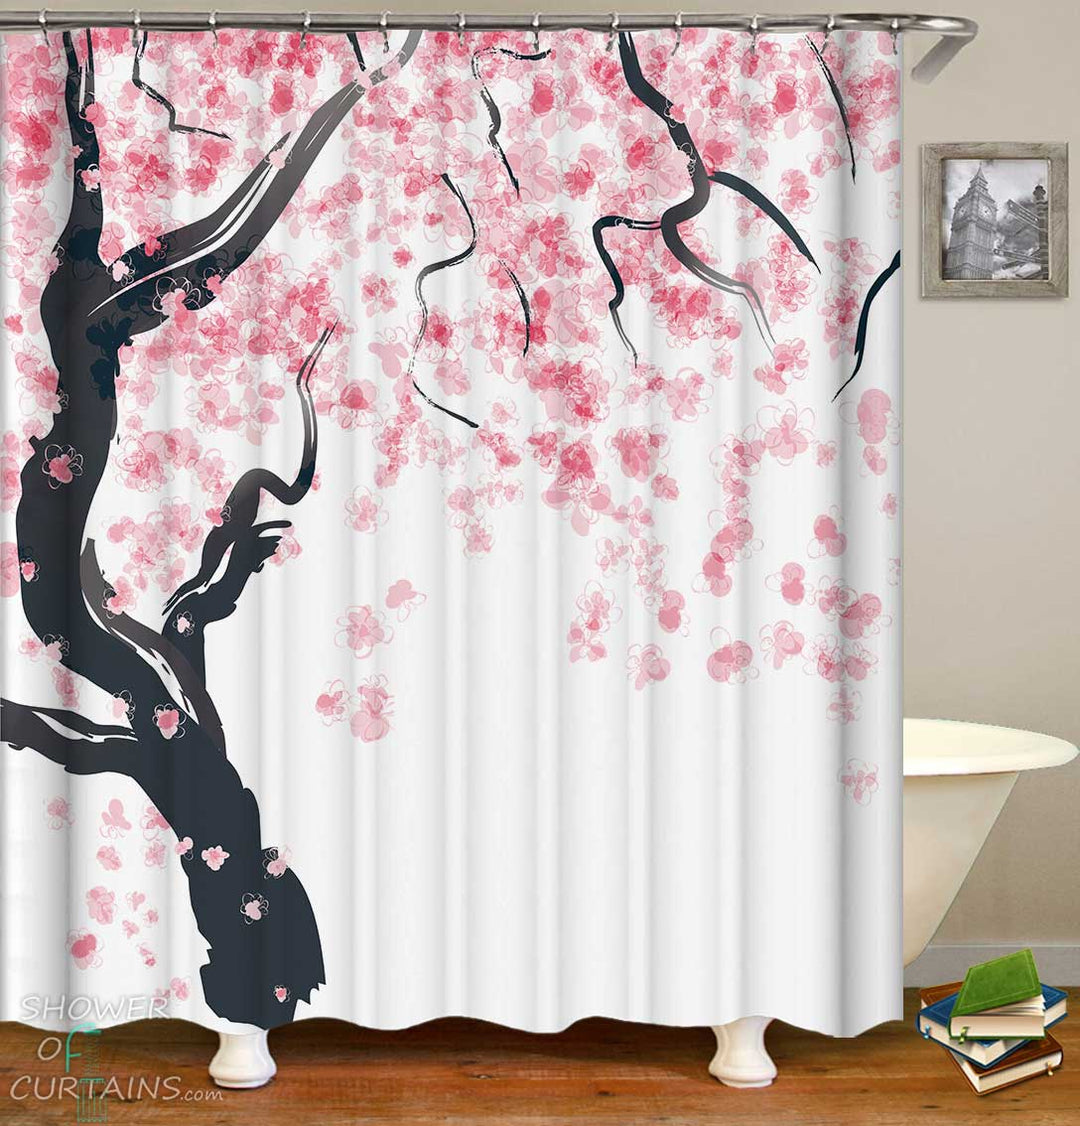 Shower Curtains with Simple Cherry Blossom